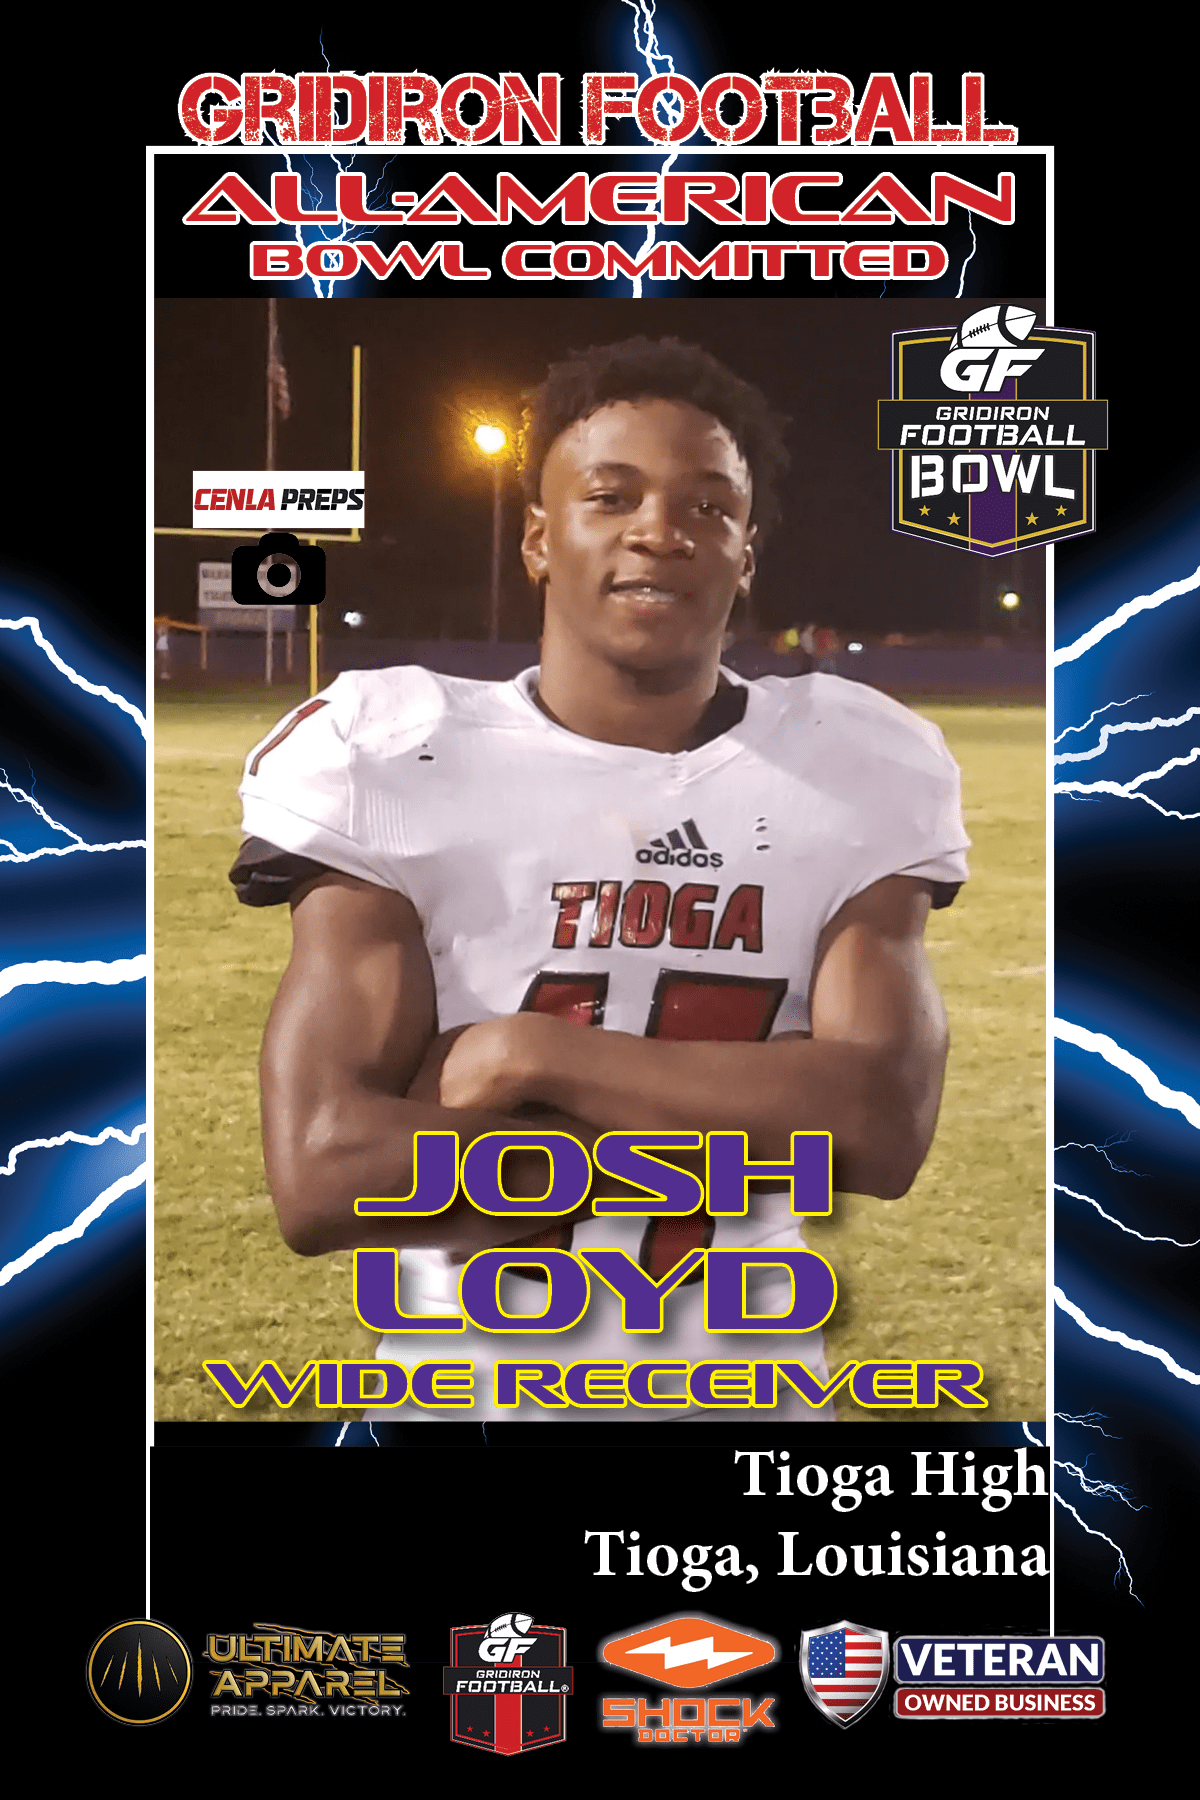 BREAKING NEWS: Tioga High School (La.) WR Josh Loyd has committed to play in the 2023 Gridiron Football All-American Bowl!